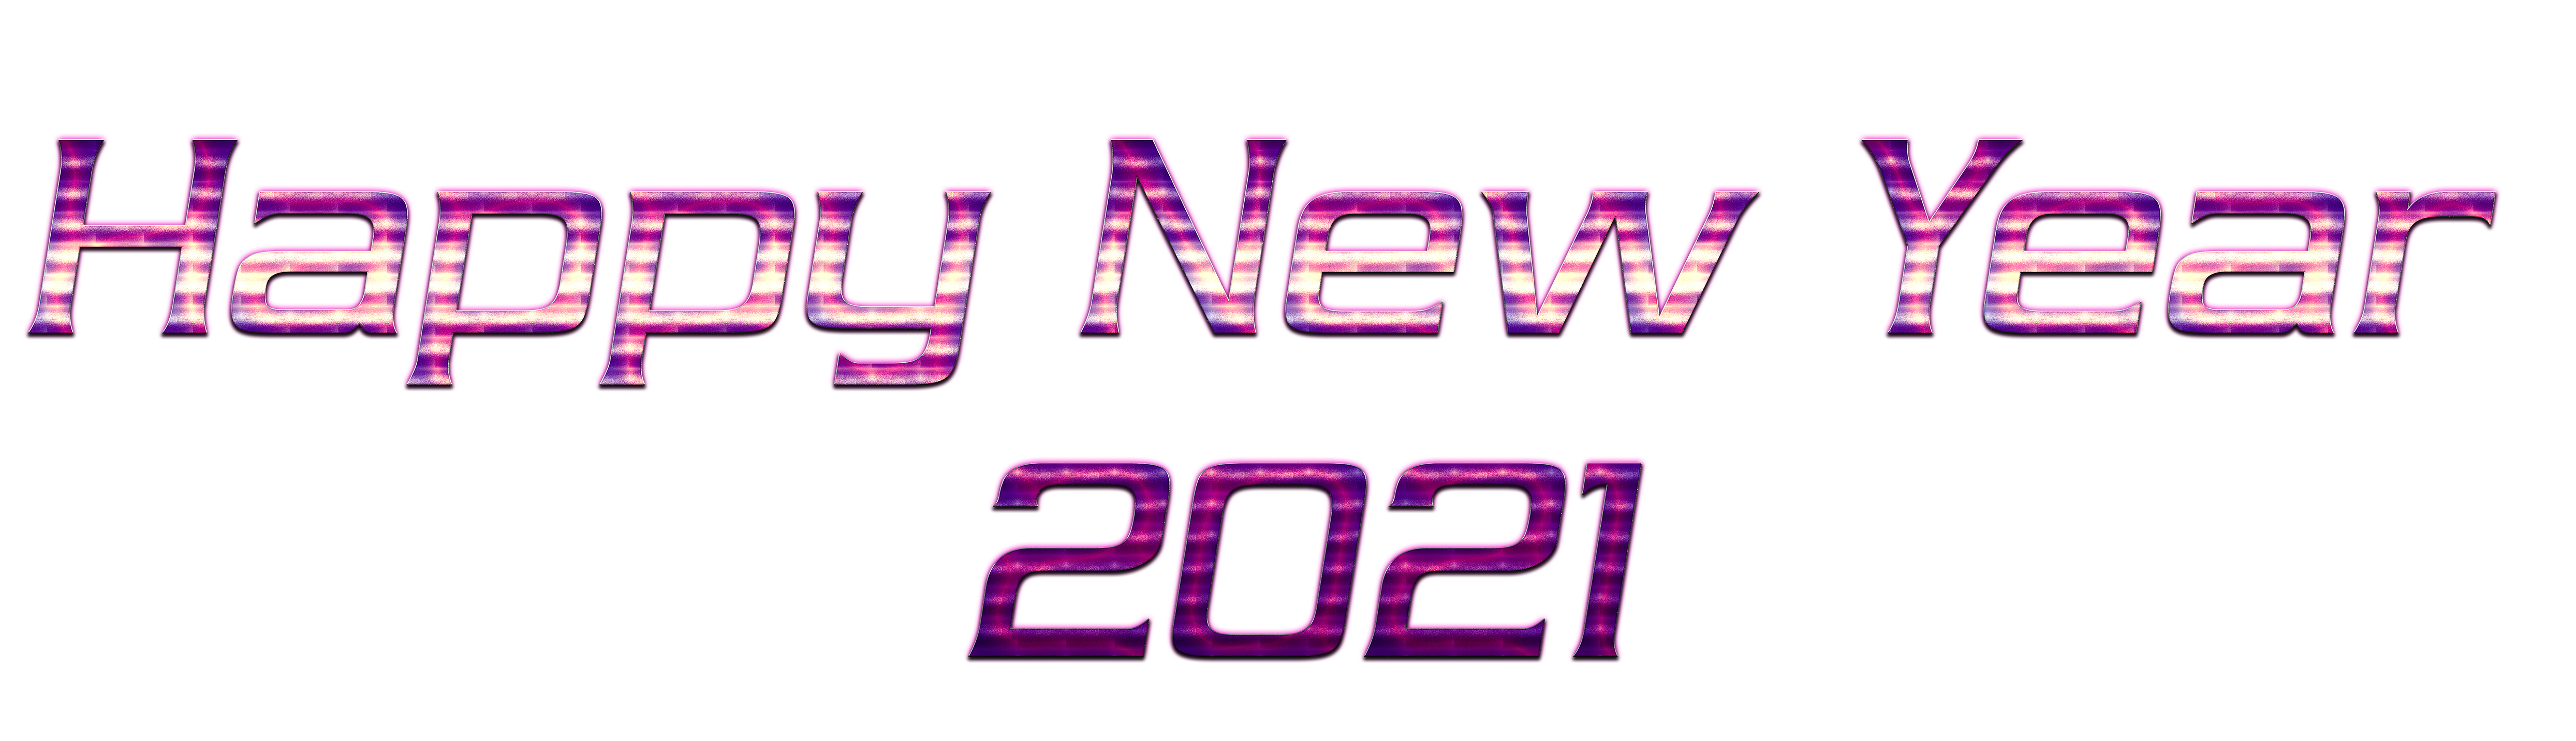 Year 2021 Happy Free Clipart HD PNG Image